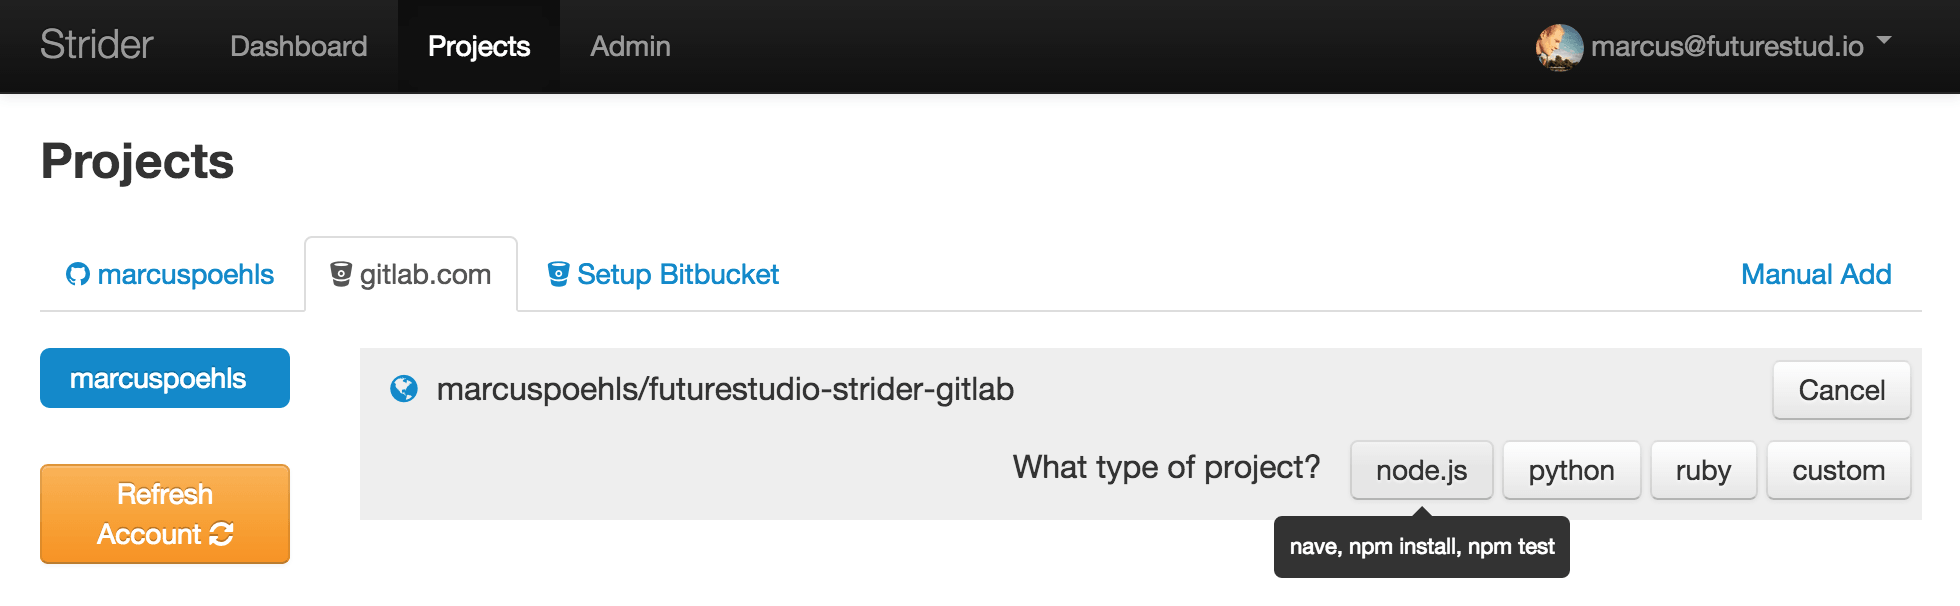 Strider GitLab Project Overview